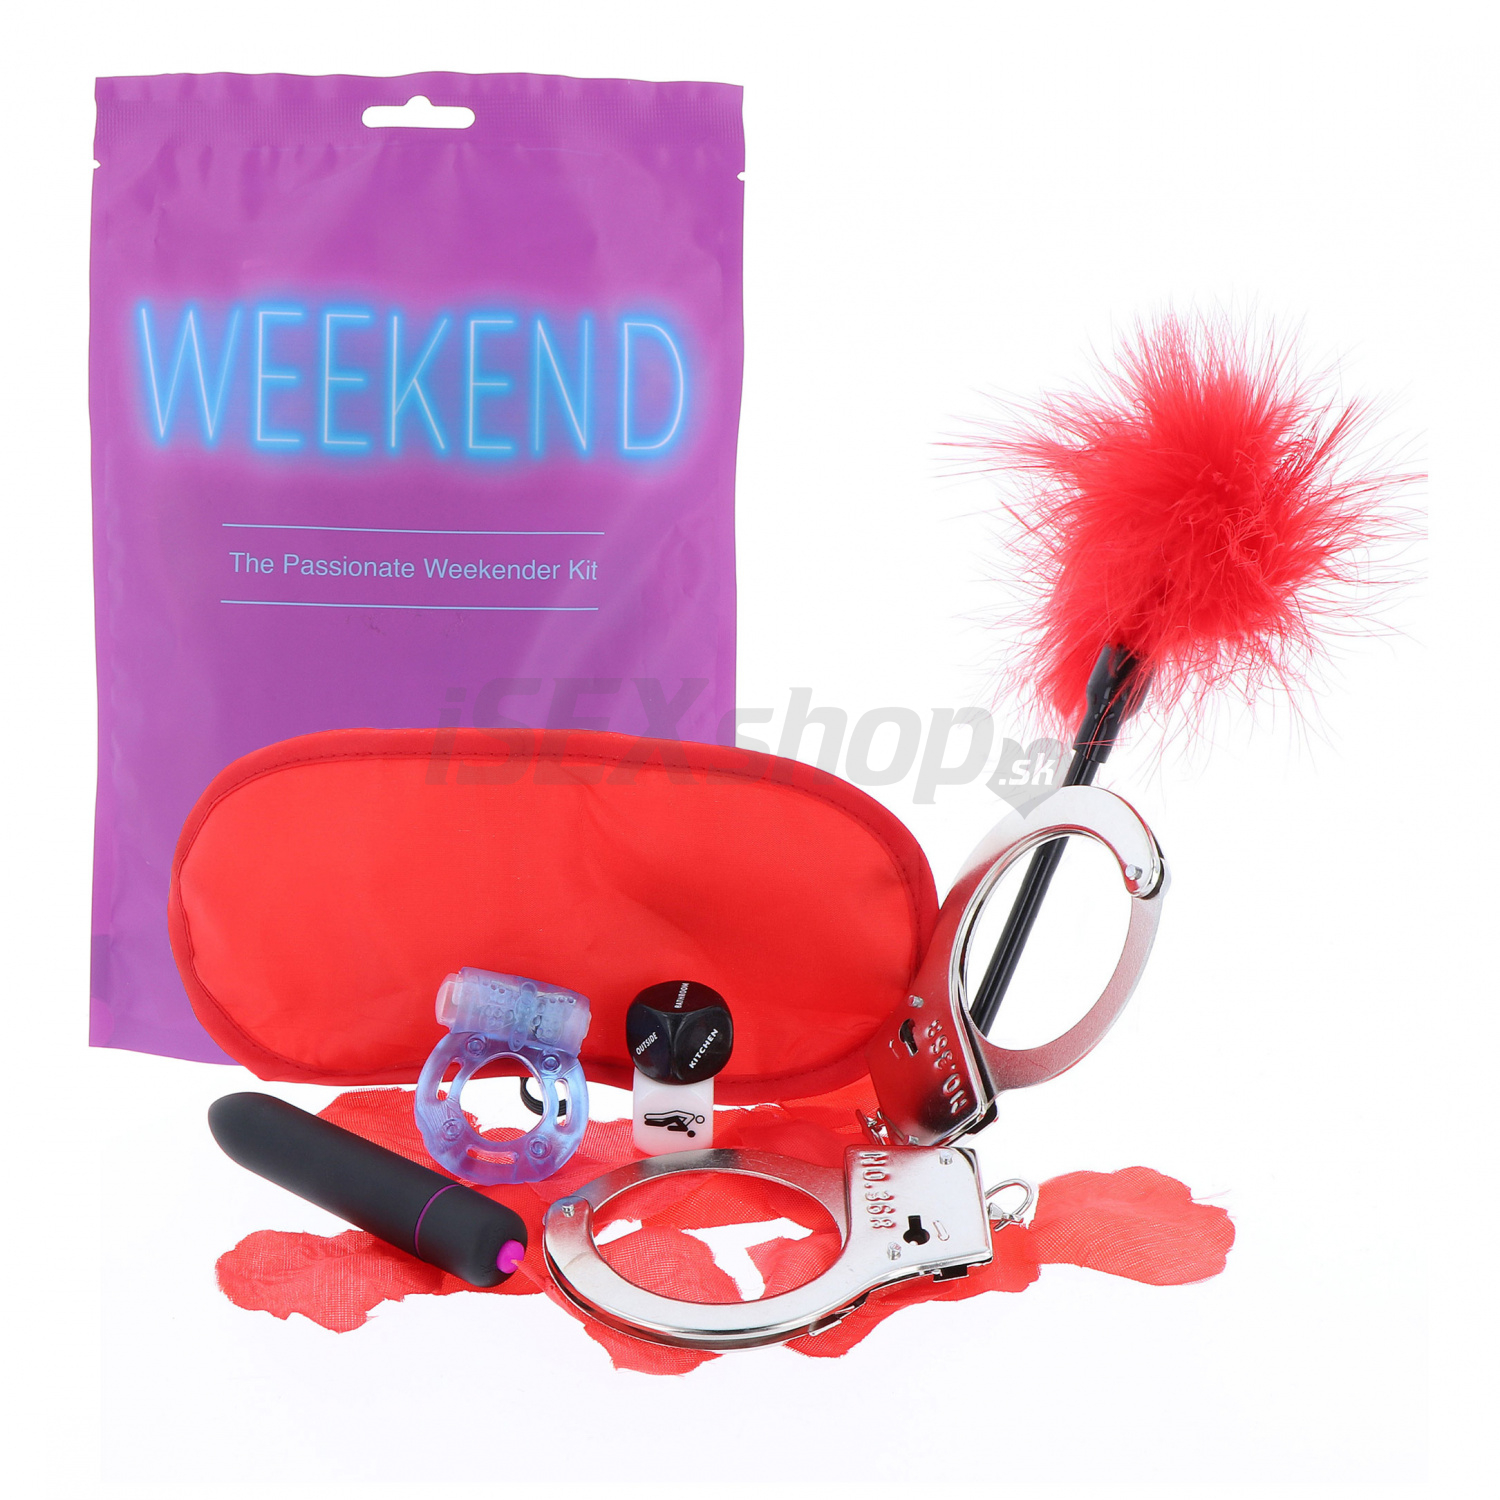 E-shop The Passionate Weekend kit